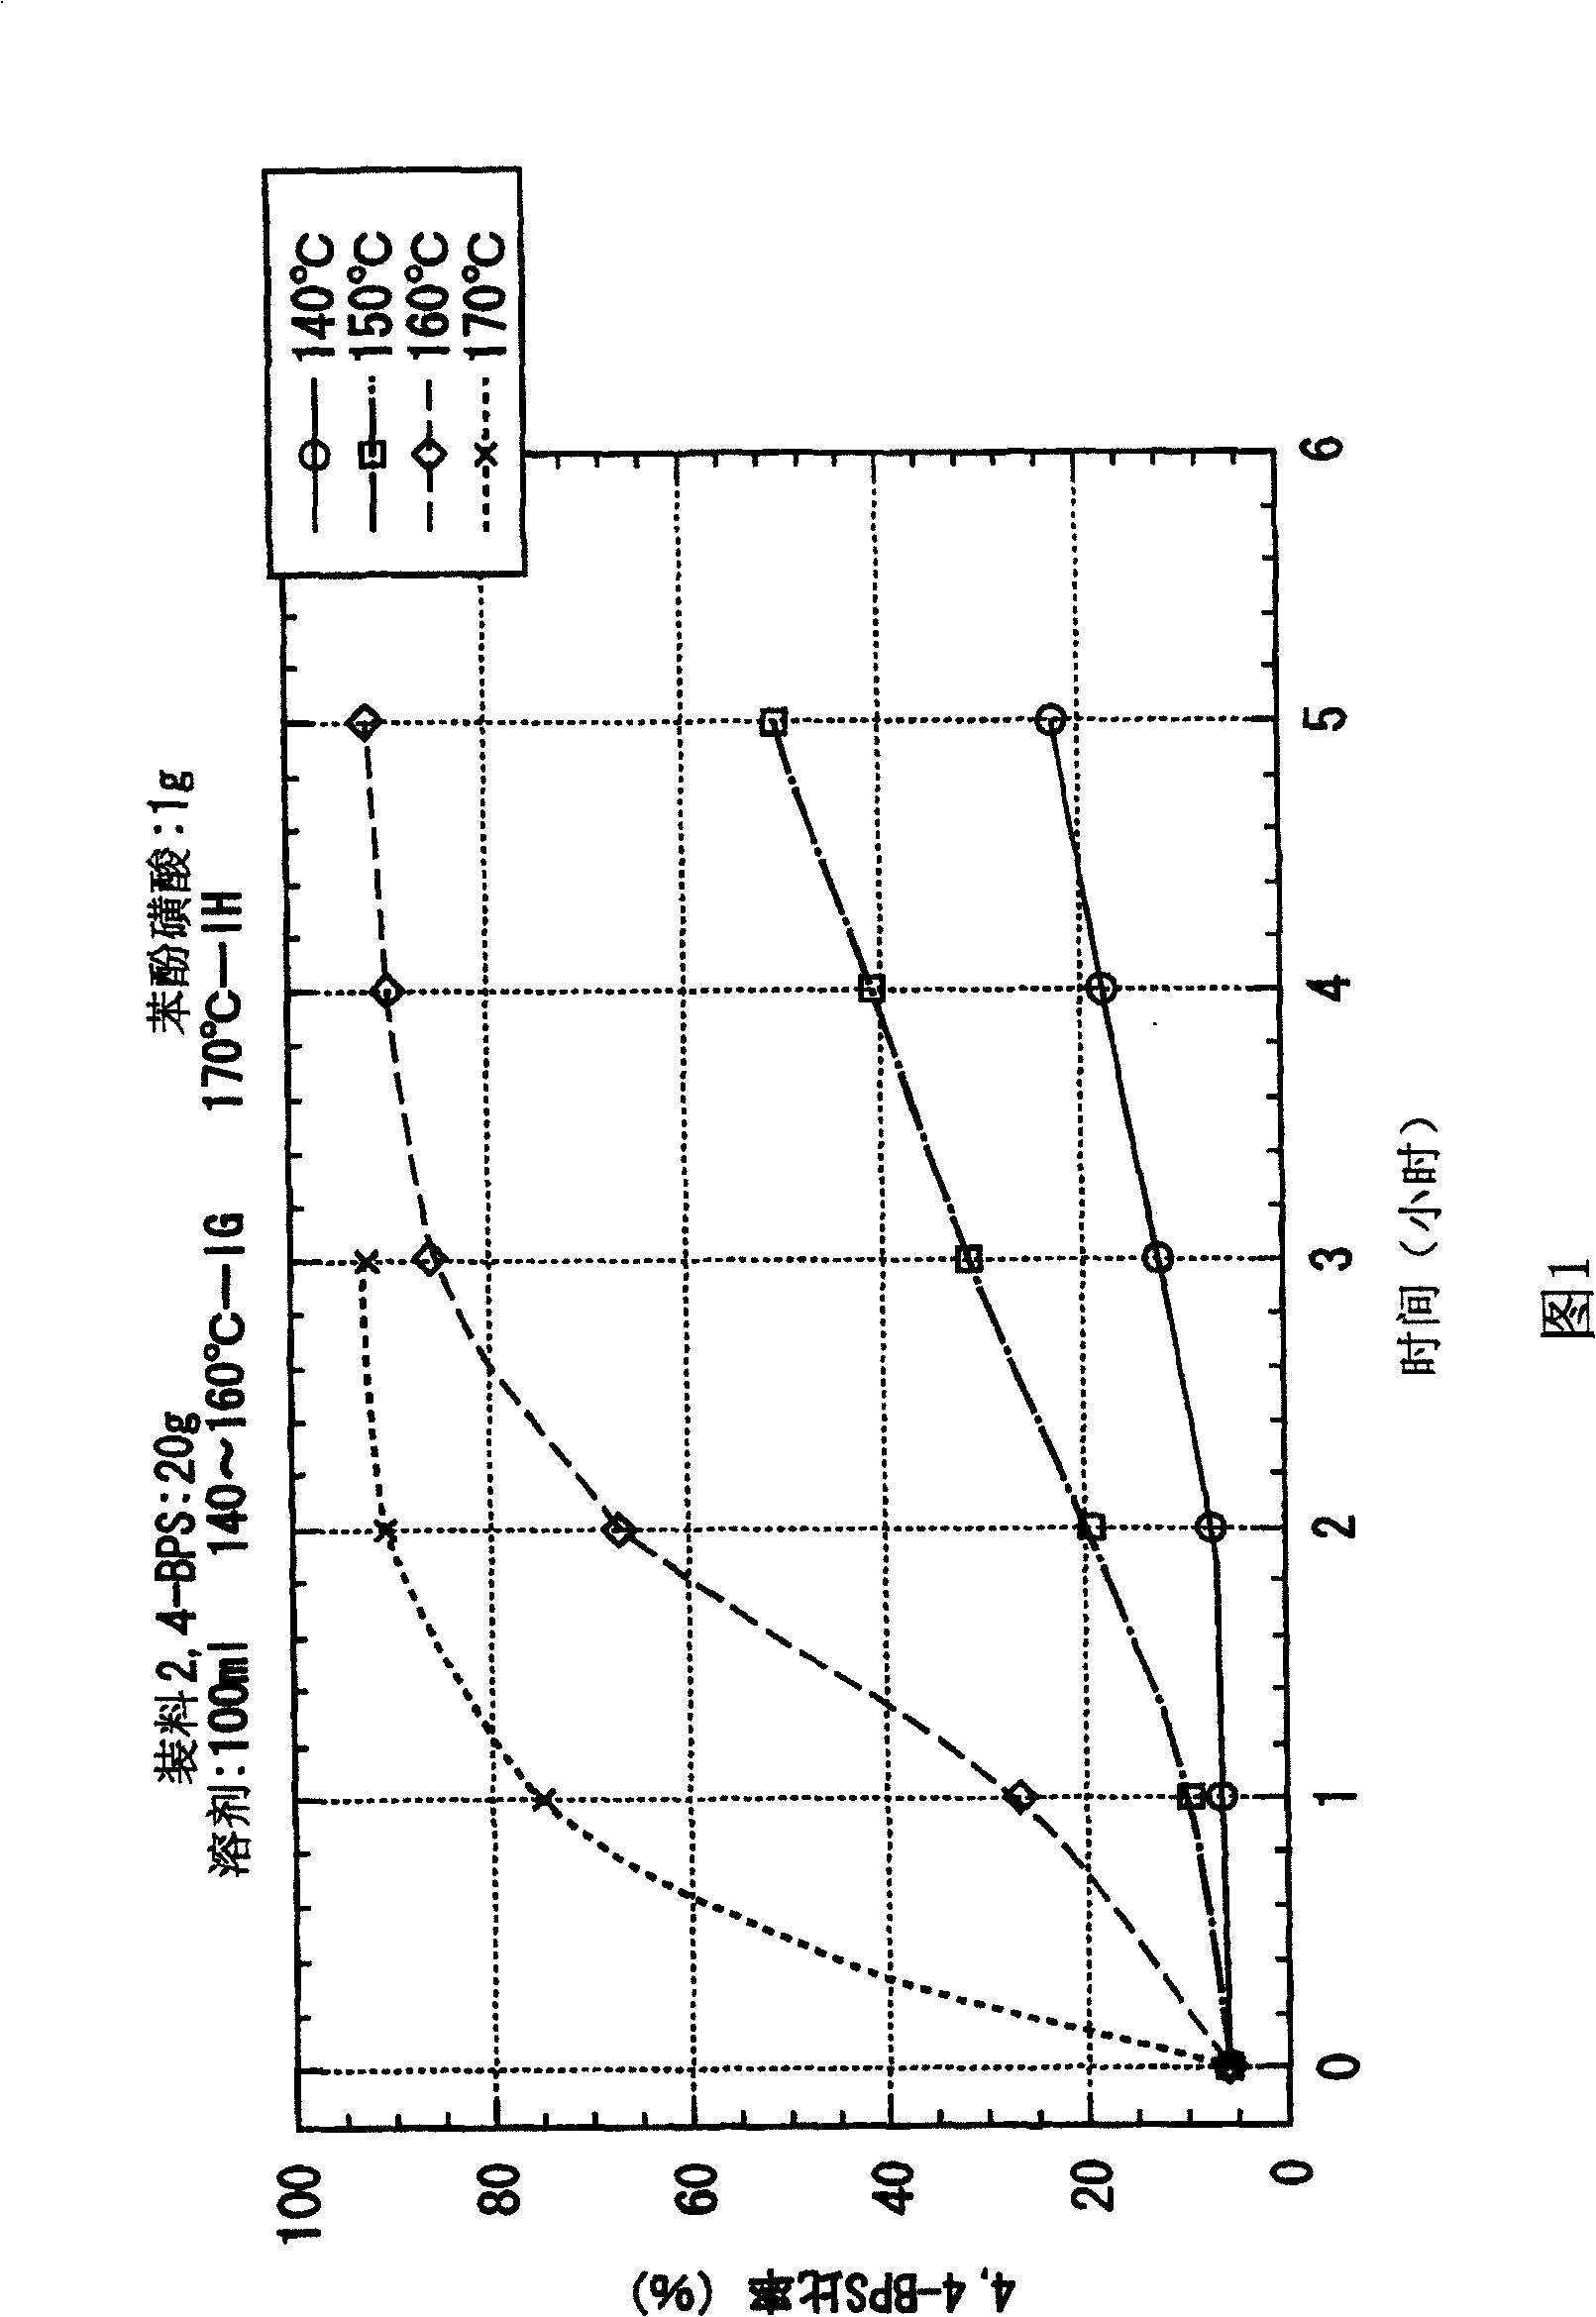 Process for producing 4,4'-bisphenol sulfone